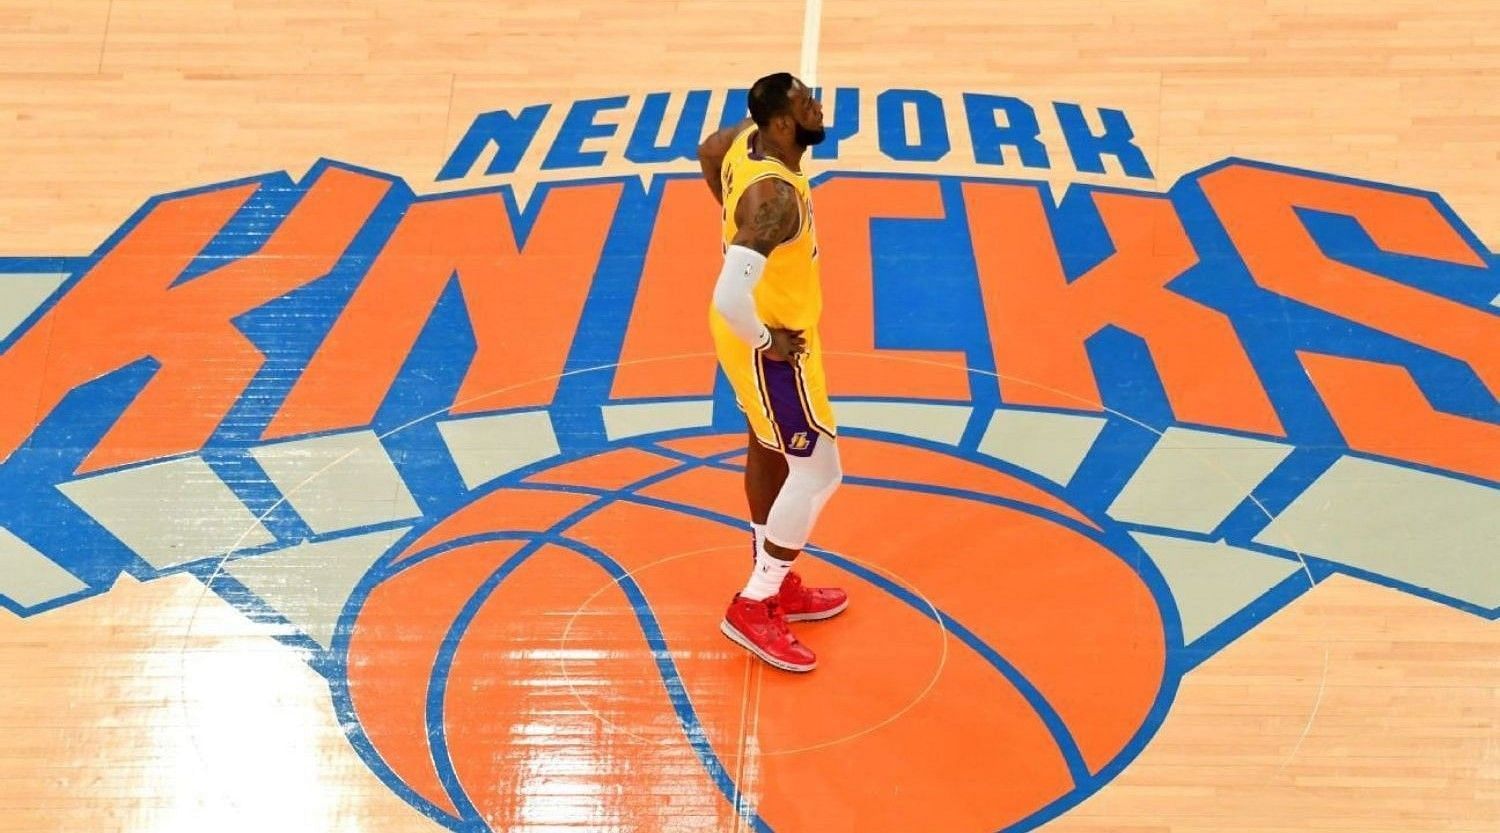 LeBron James stirred rumors of him moving to New York after he arrived at the Knicks